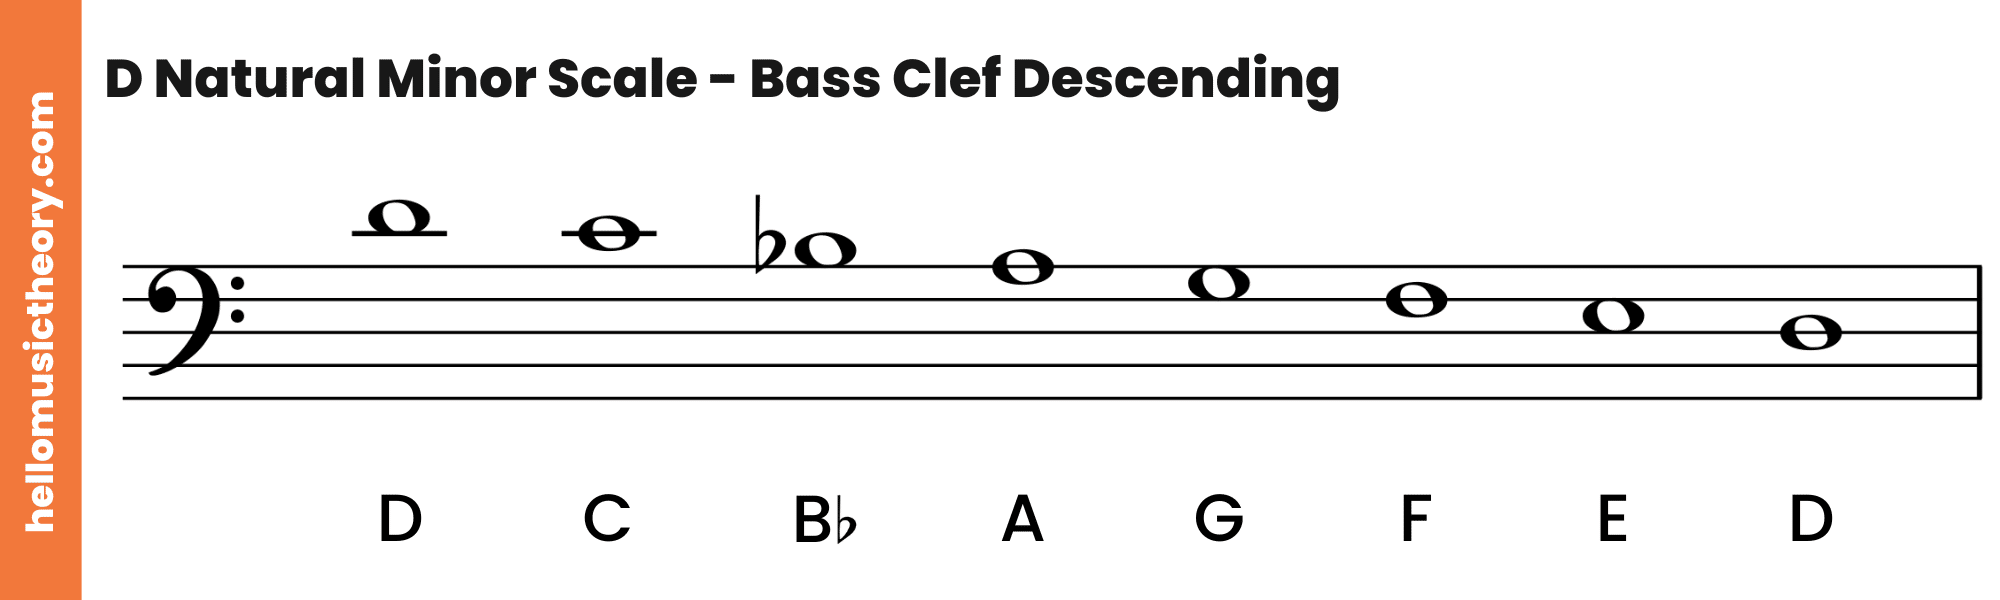 D Natural Minor Scale Bass Clef Descending